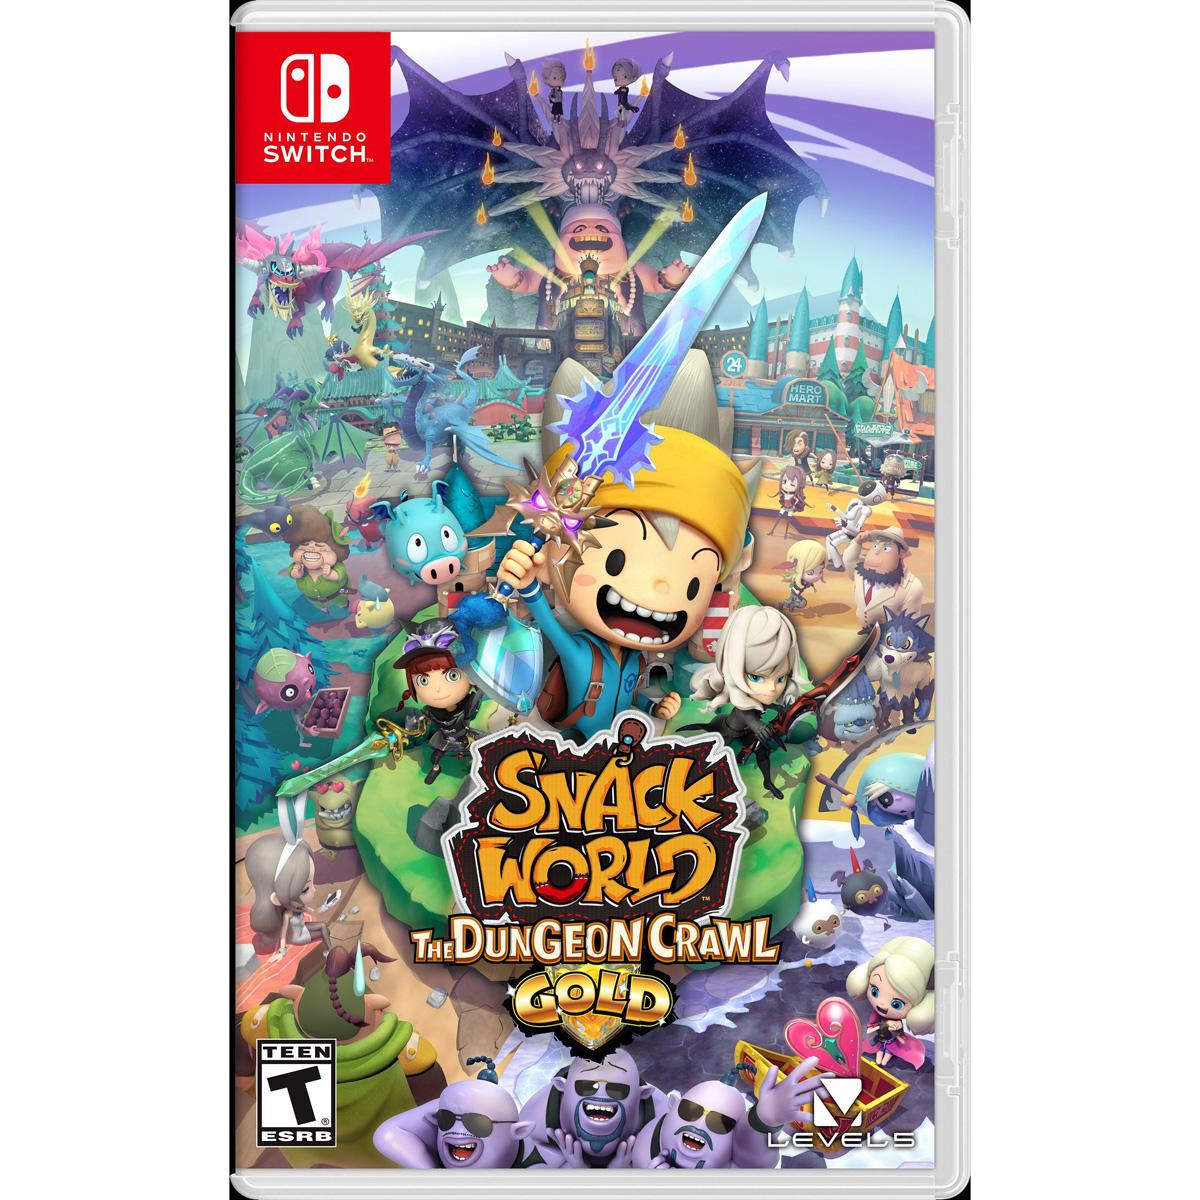 Snack World The Dungeon Crawl Gold for $17.97